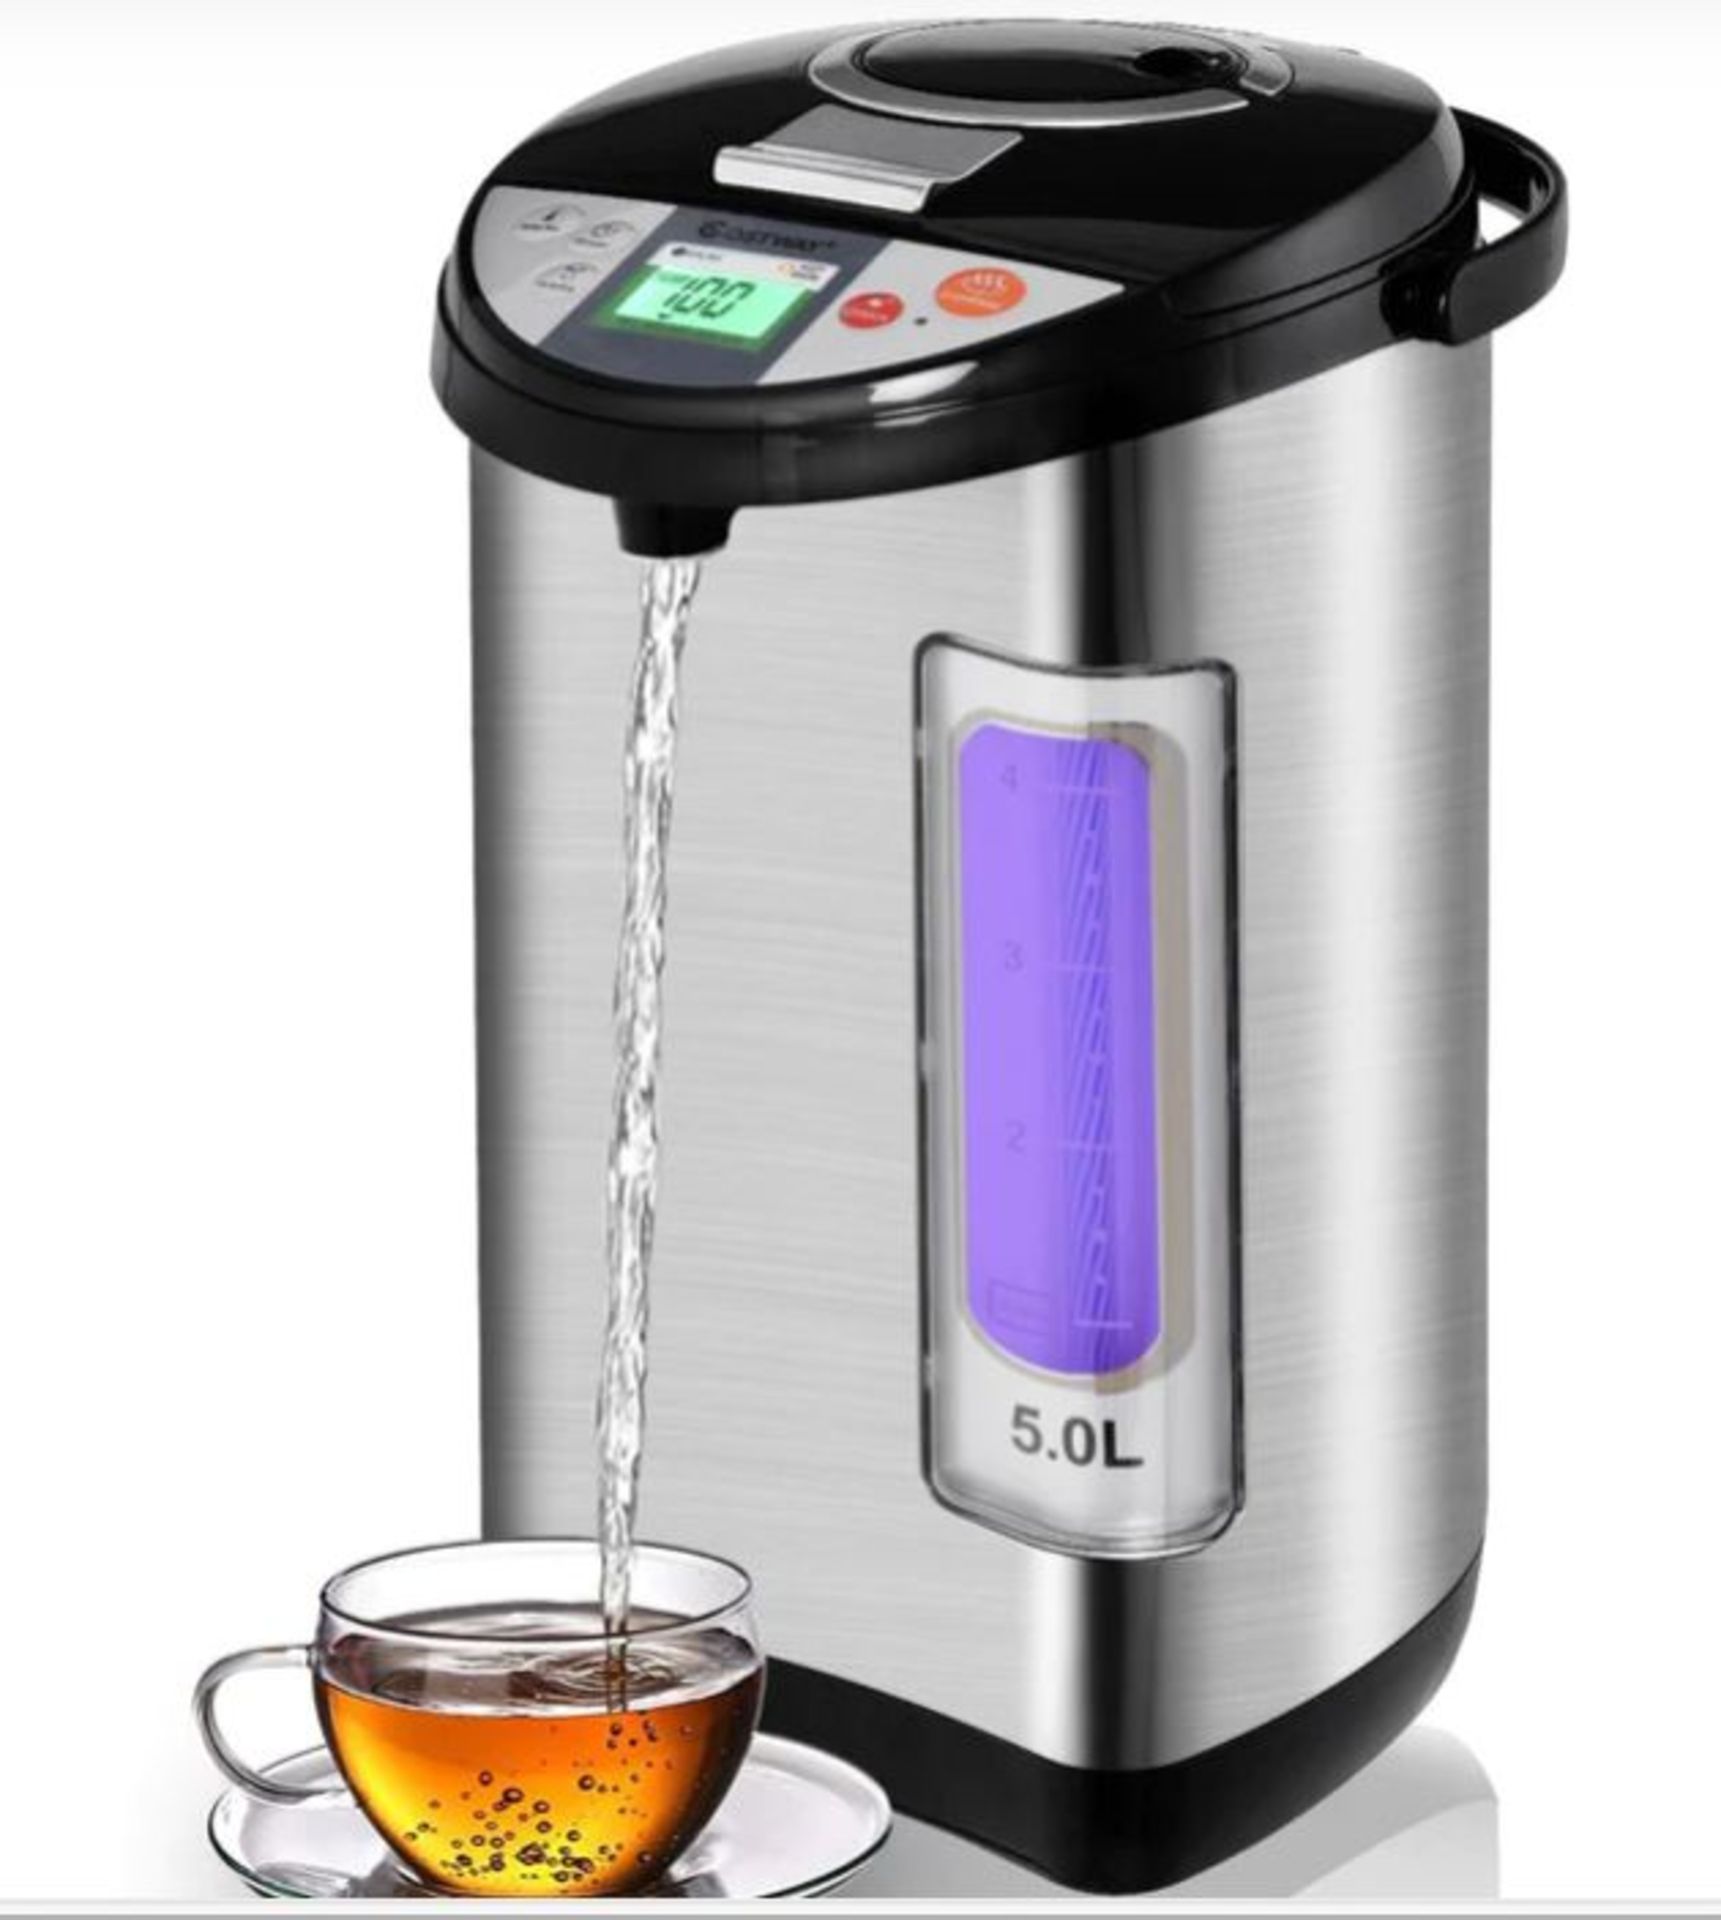 5L ADJUSTABLE INSTANT HOT ELECTRIC WATER DISPENSER WITH AUTO-CUT OFF. - ER53. When you use it, the